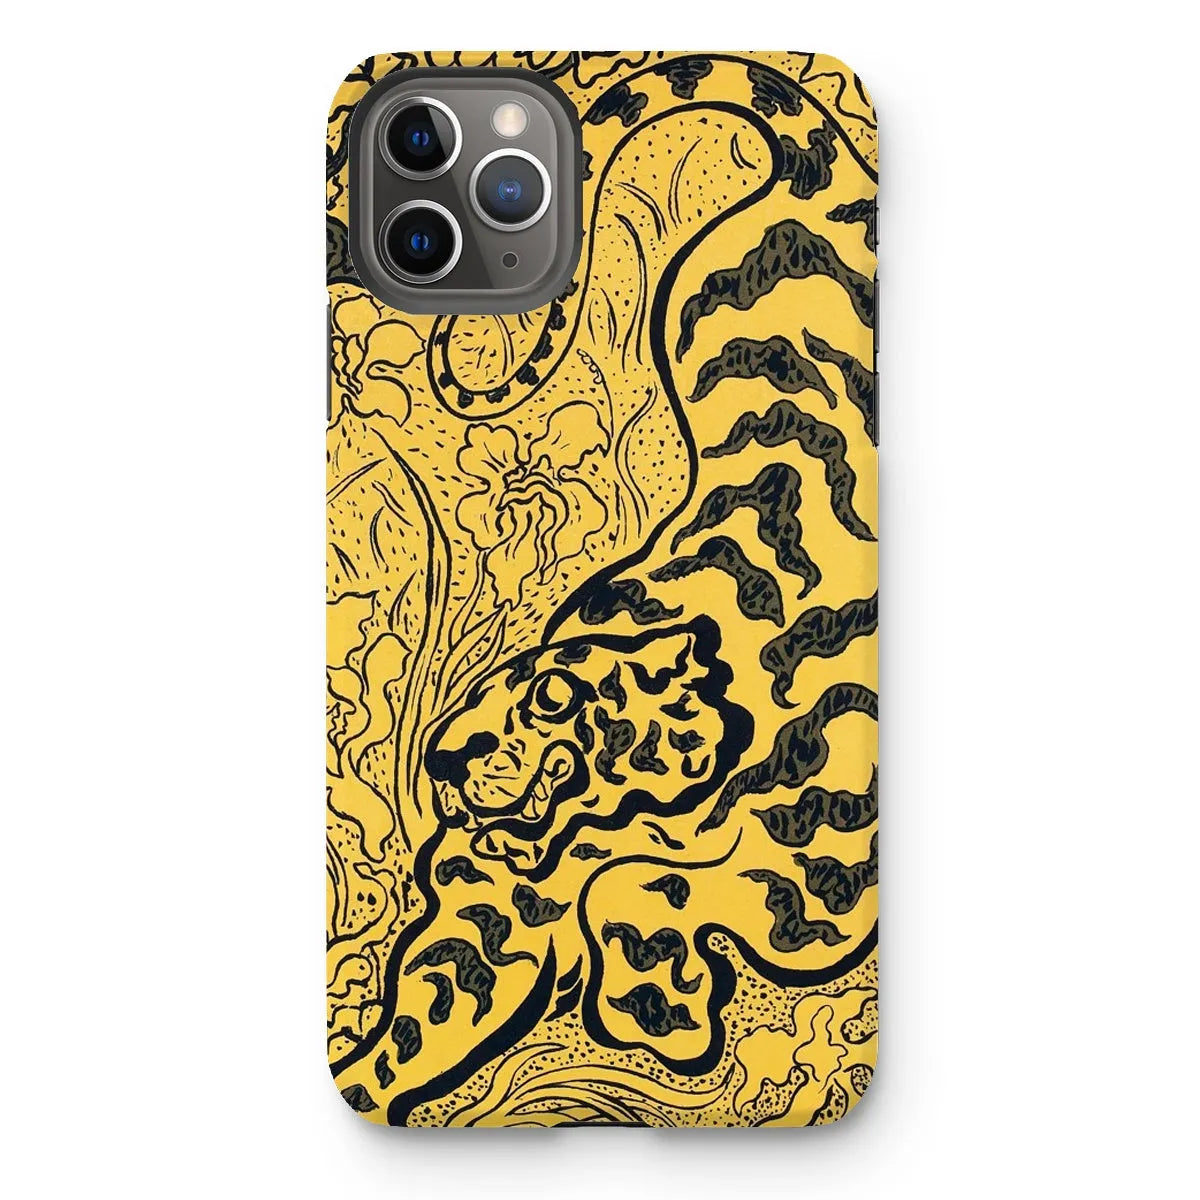 Tiger In The Jungle - Graphic Art Phone Case - Paul Ranson - Iphone 11 Pro Max / Matte - Mobile Phone Cases - Aesthetic